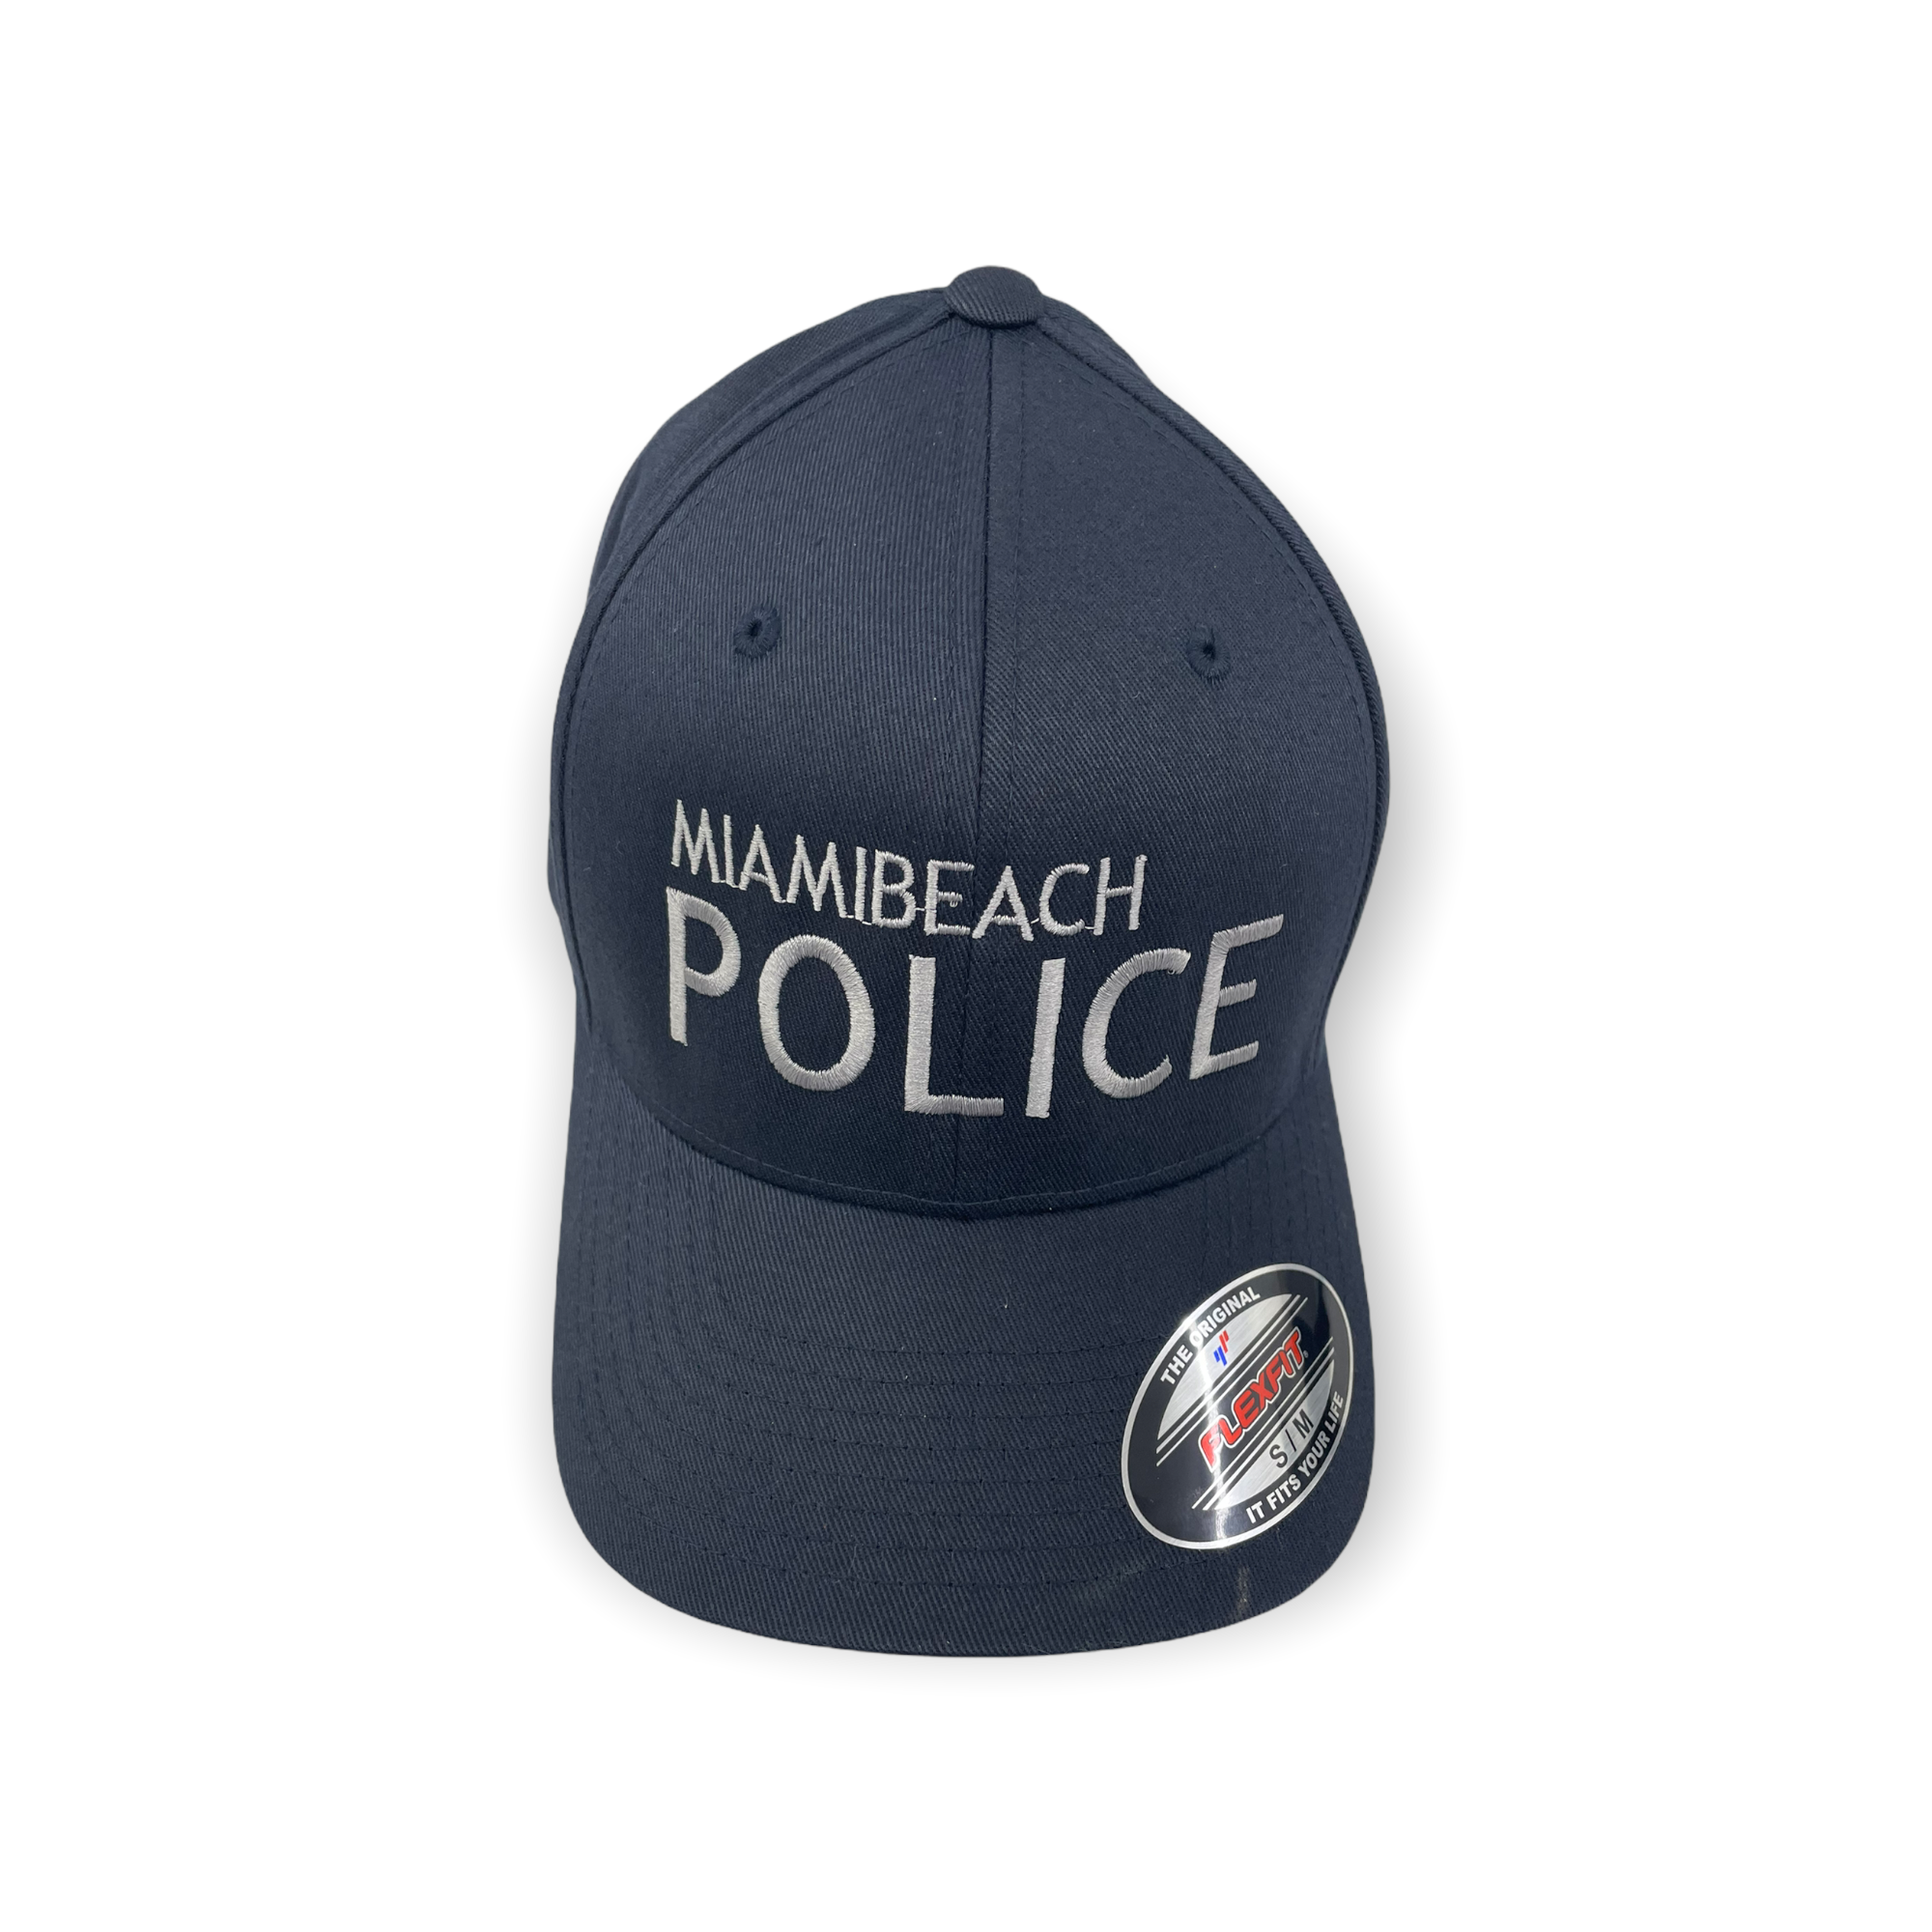 Miami Beach Police Department Flexfit Adult Wooly Cap